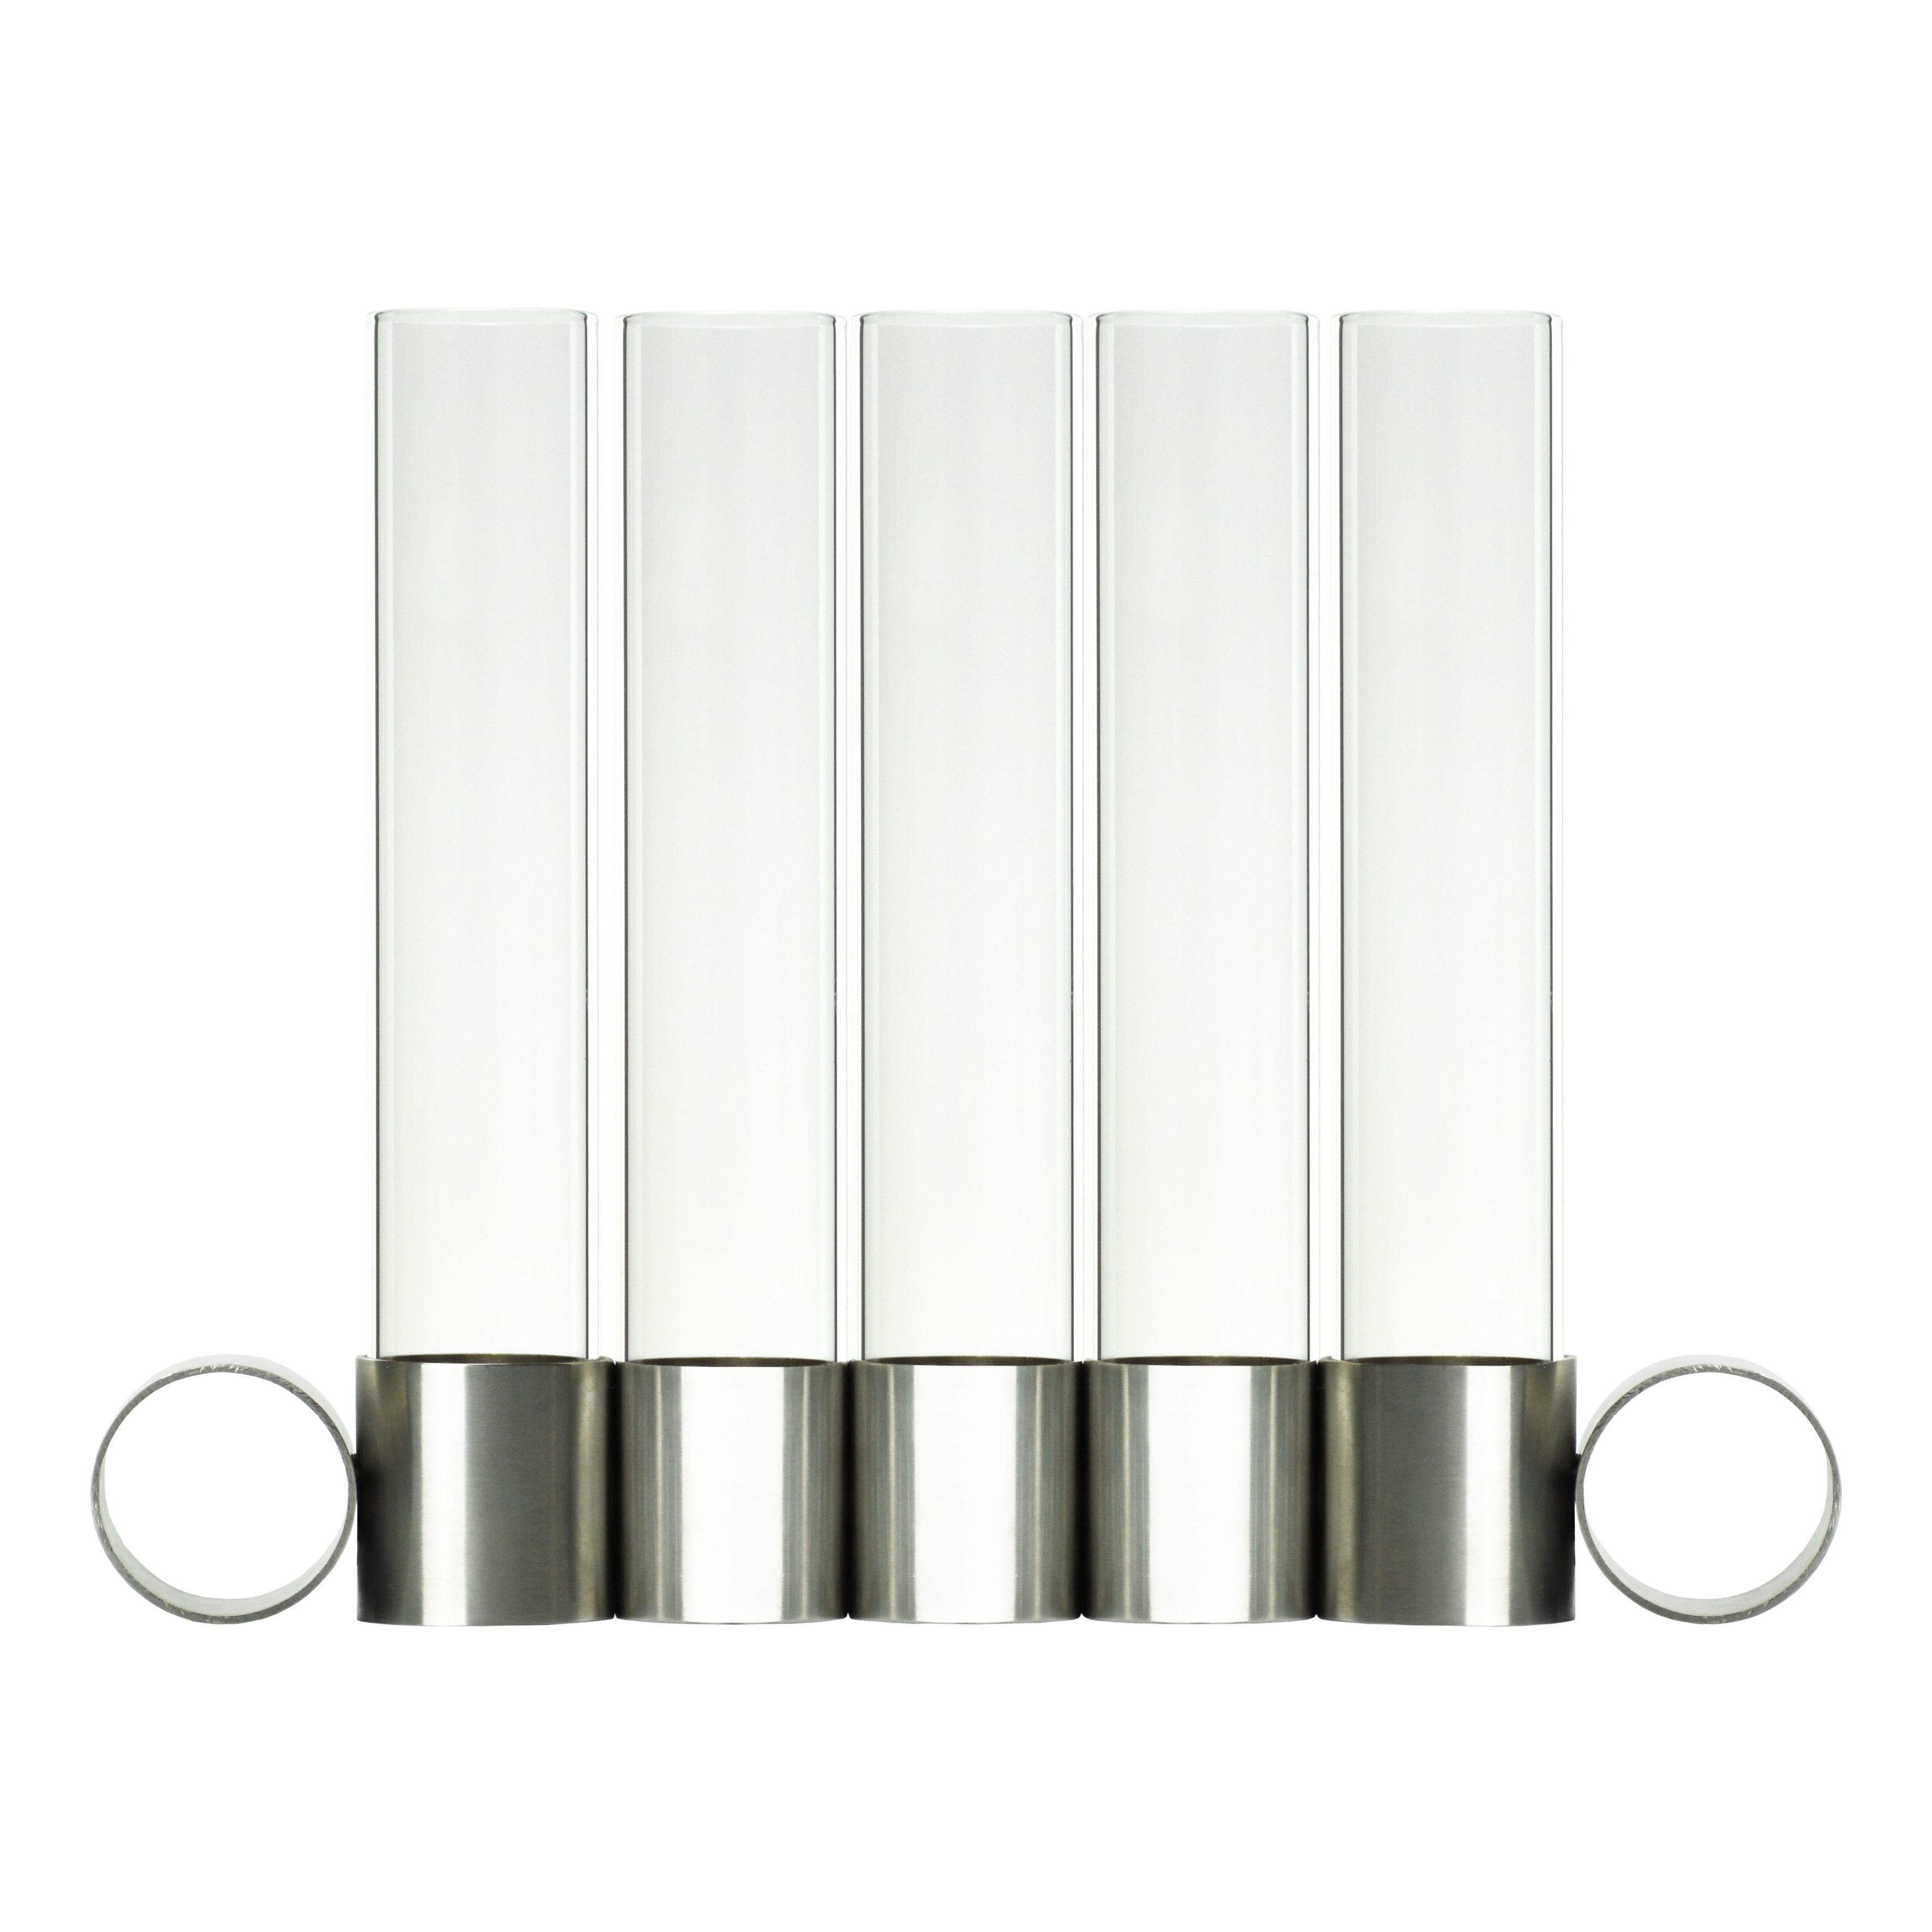 Tempio del Tempo 5 Candleholder by Coki Barbieri
Dimensions: W 28 x D 4 x H 20 cm.
Materials: stainless steel (made in Italy), borosilicate glass (made in Italy), soy wax or olive oil wax candle and TPE rubber.

FEATURES
11 divided